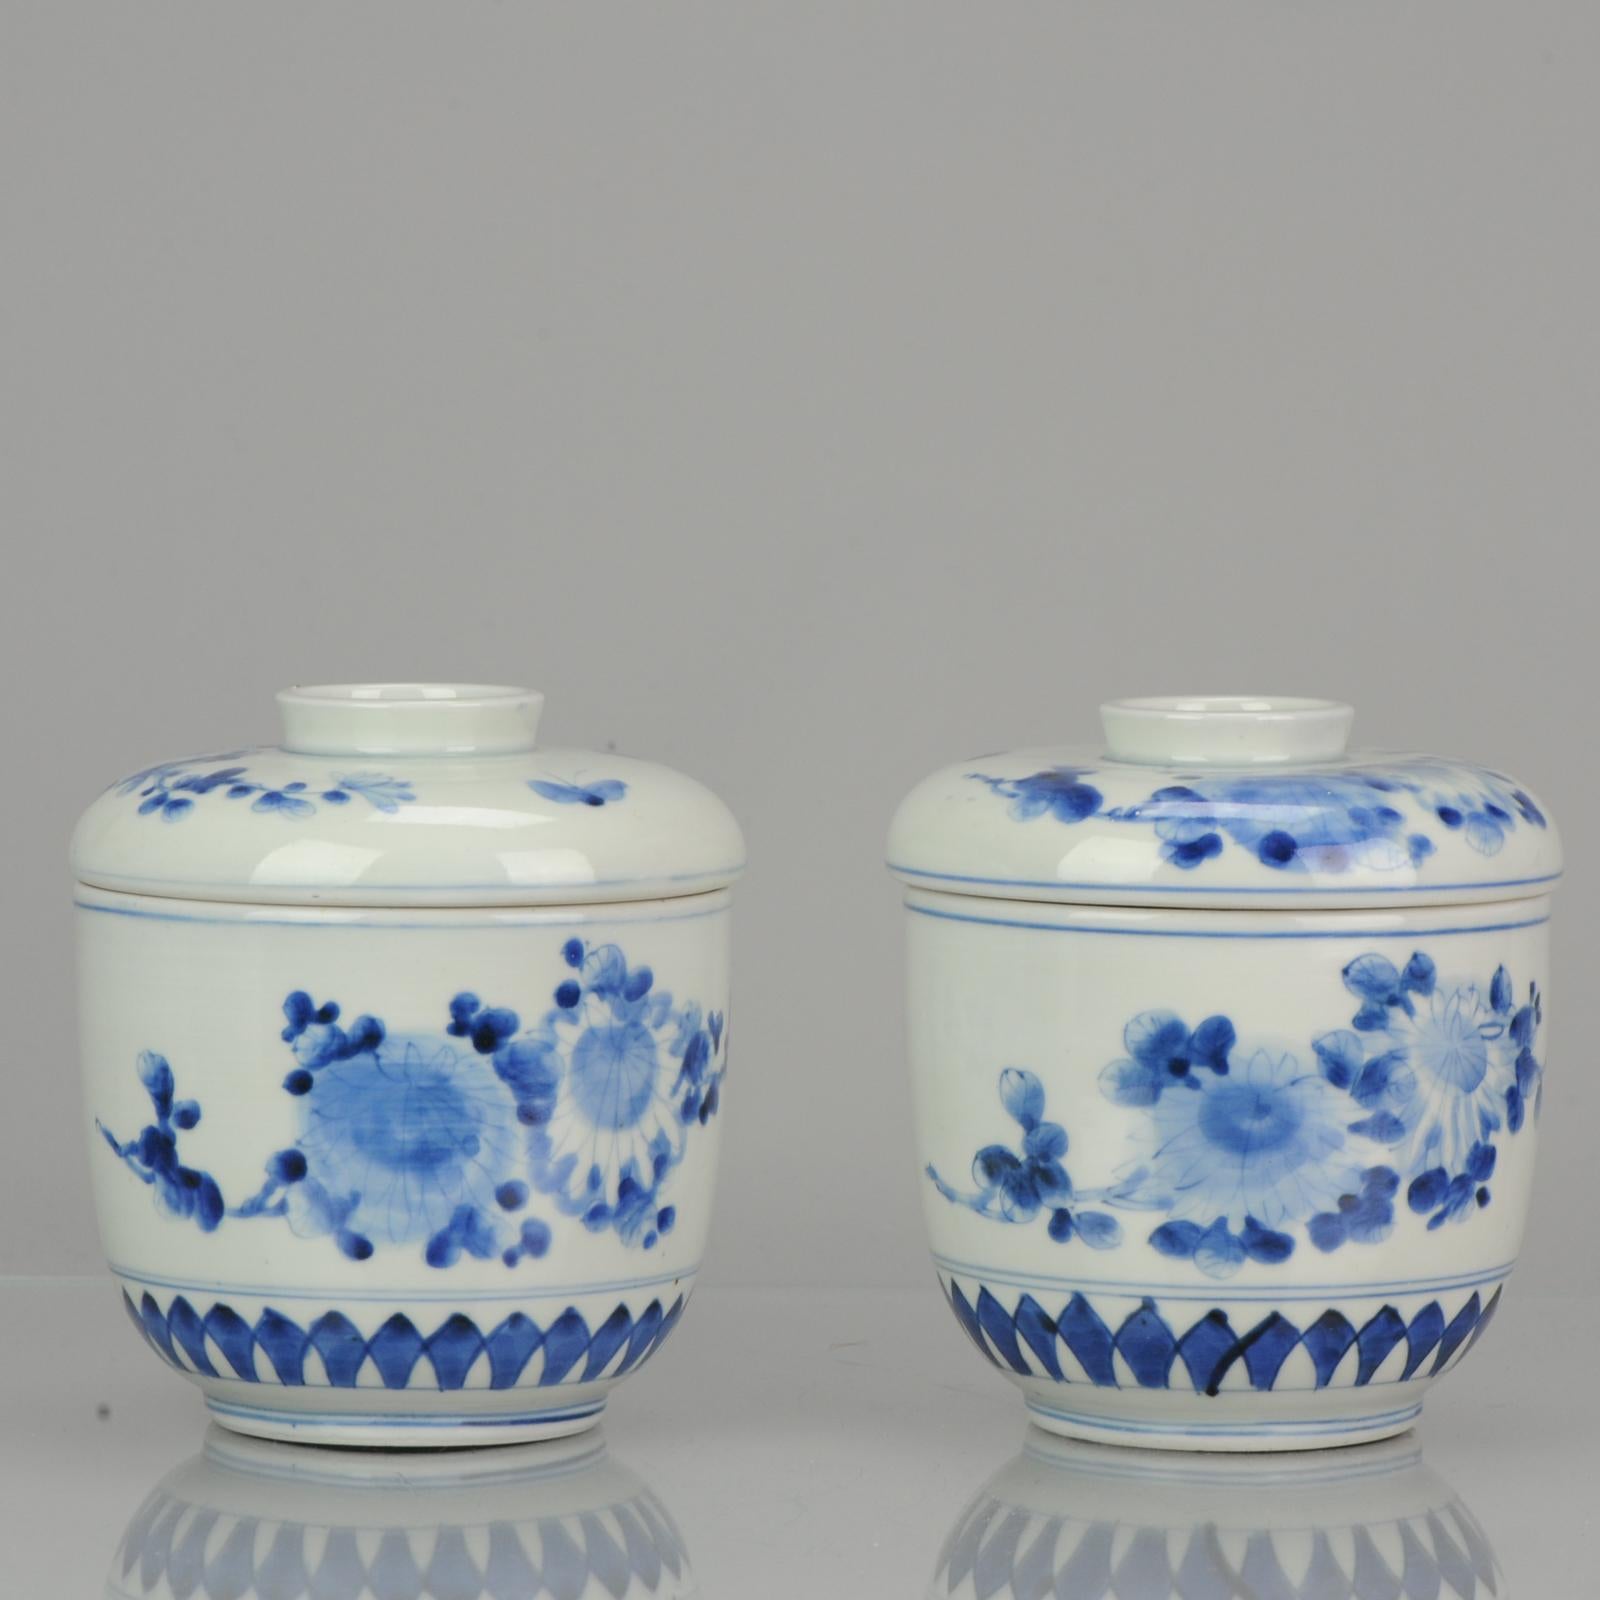 Very nice pieces with underglaze blue scene of butterflies and flowers in a landscape scene.

Both with a six character mark in underglaze blue

Condition
Overall Condition Both perfect condition. Size: 125mm diameter, 140mm high.